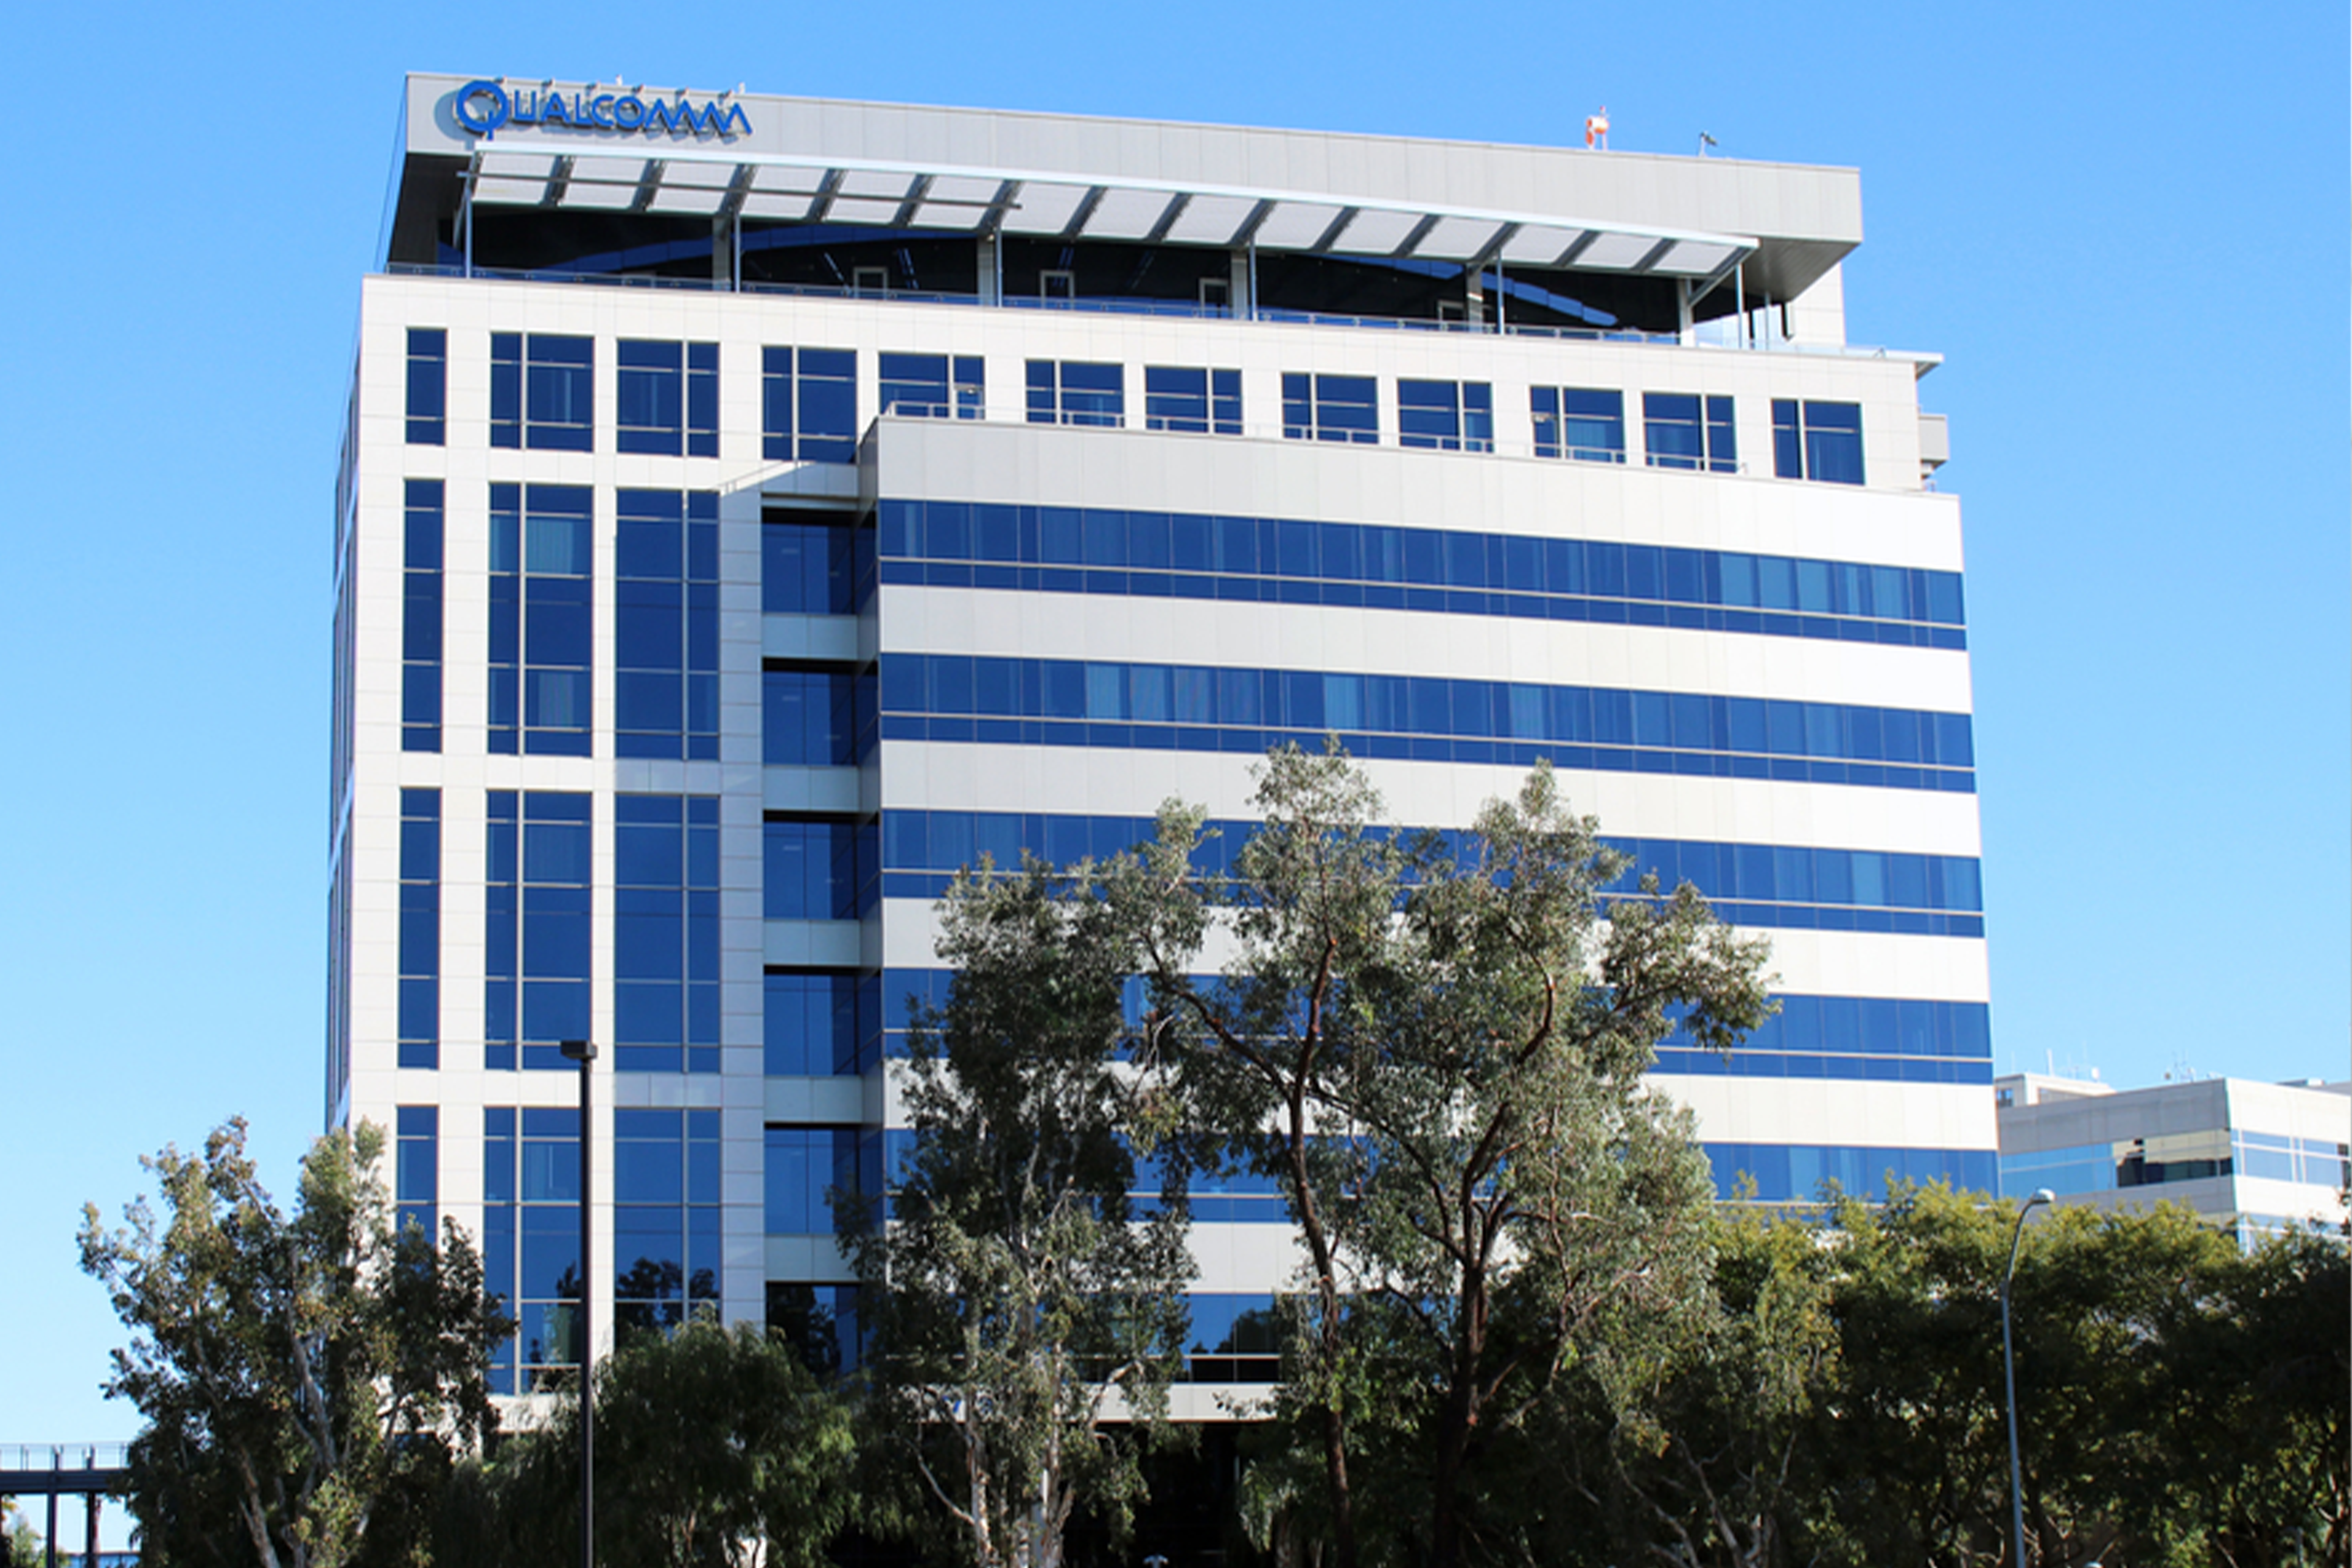 Located in the center of San Diego’s High-Tech Office Cluster